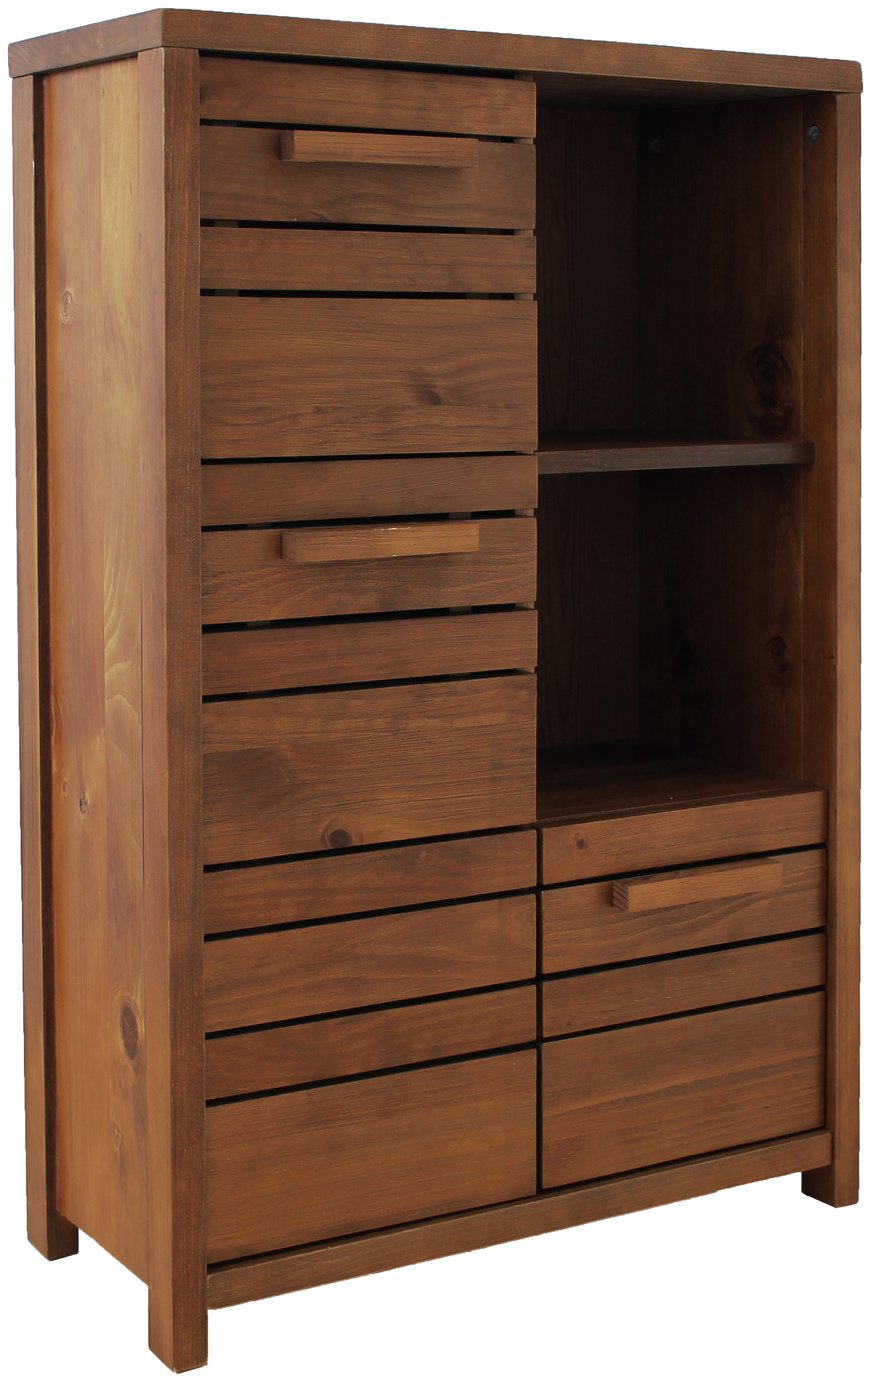 Argos Home Cranbrook Solid Pine Console Storage Cabinet review